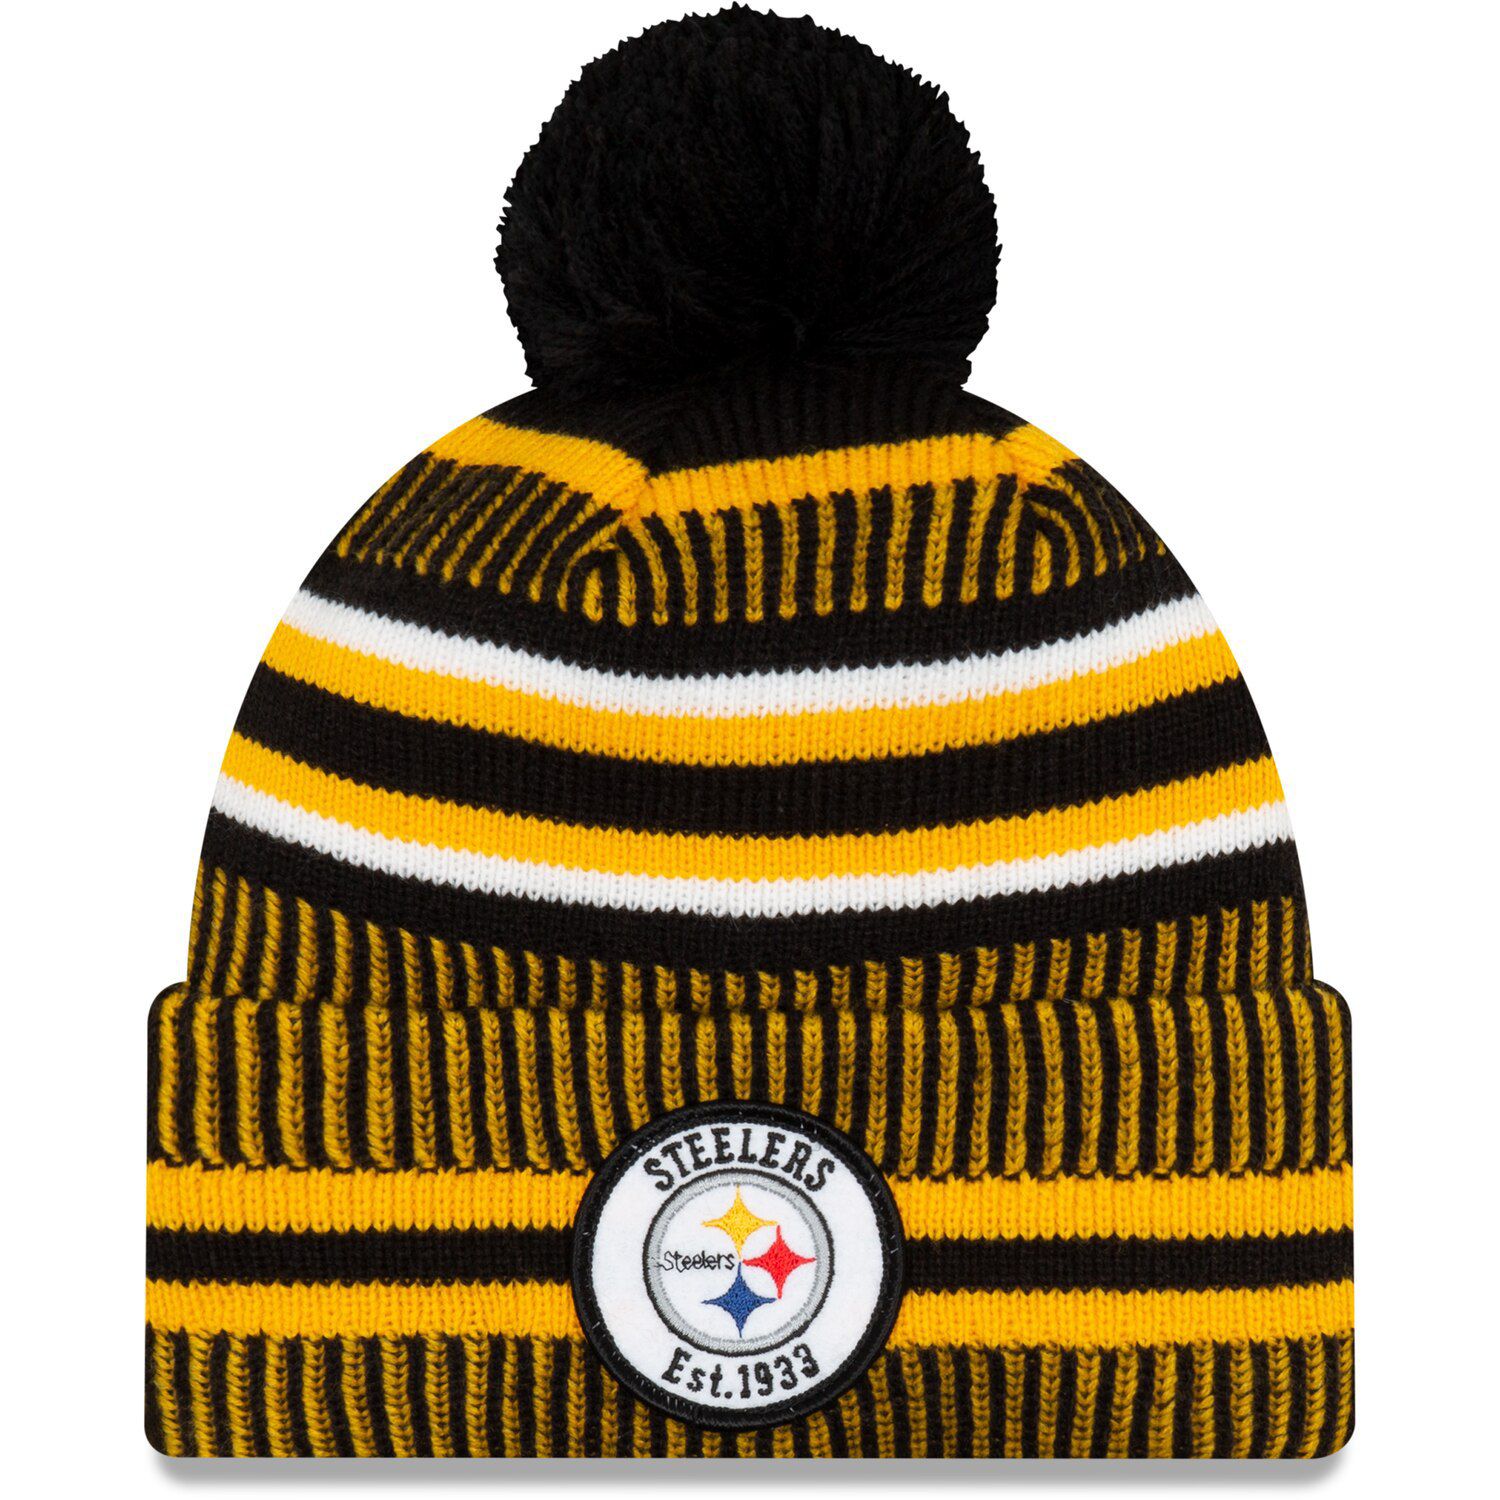 pittsburgh steelers knit hat